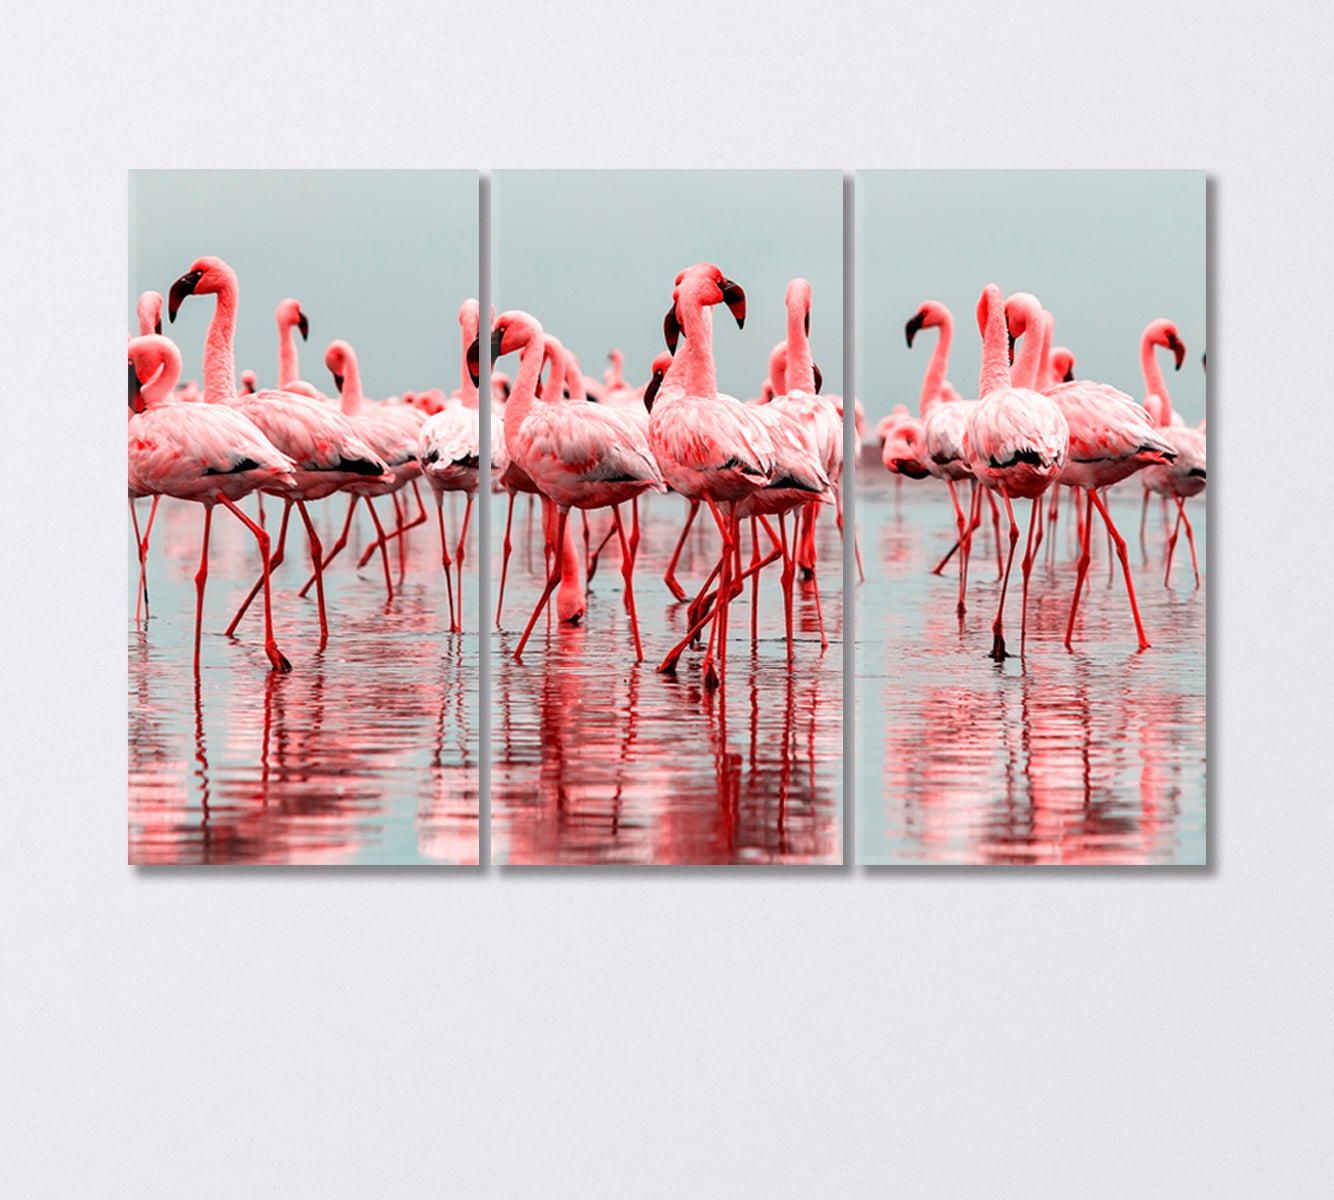 Group of African Red Flamingos Canvas Print-Canvas Print-CetArt-3 Panels-36x24 inches-CetArt